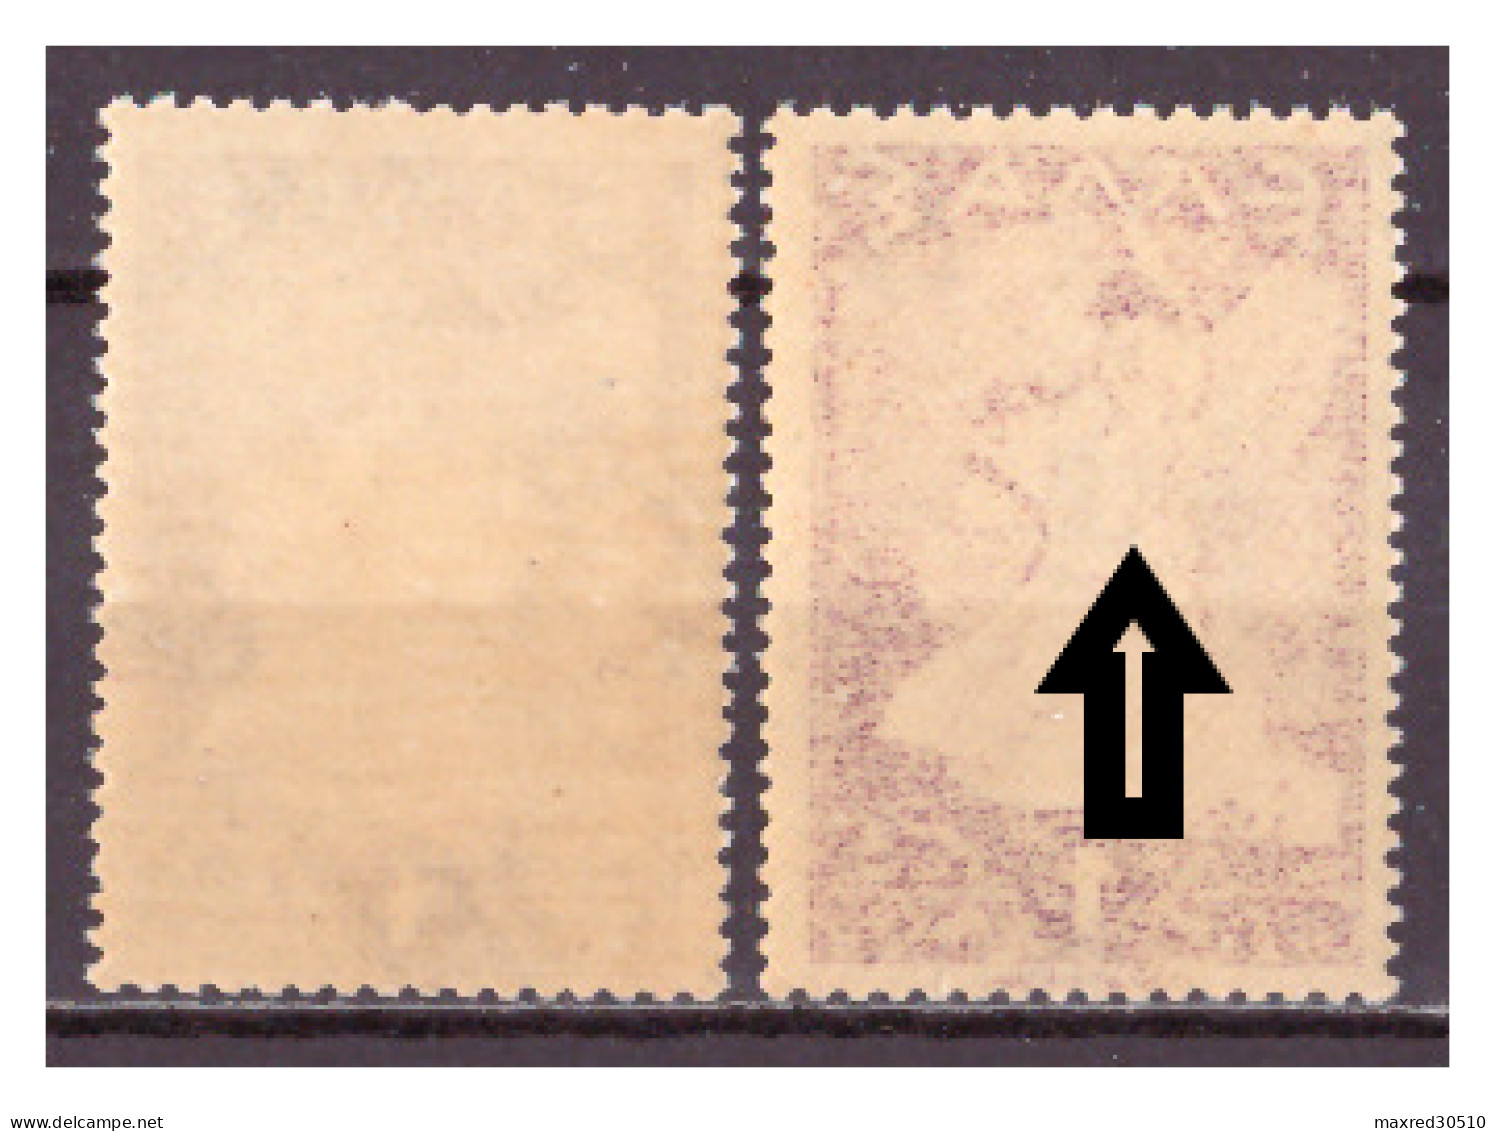 GREECE 1945 2X1L. OF THE "GLORY ISSUE" THE 2ND ONE (SEE ARROWS) WITH MIRROR PRINTING AT THE GUM ERROR MNH - Abarten Und Kuriositäten